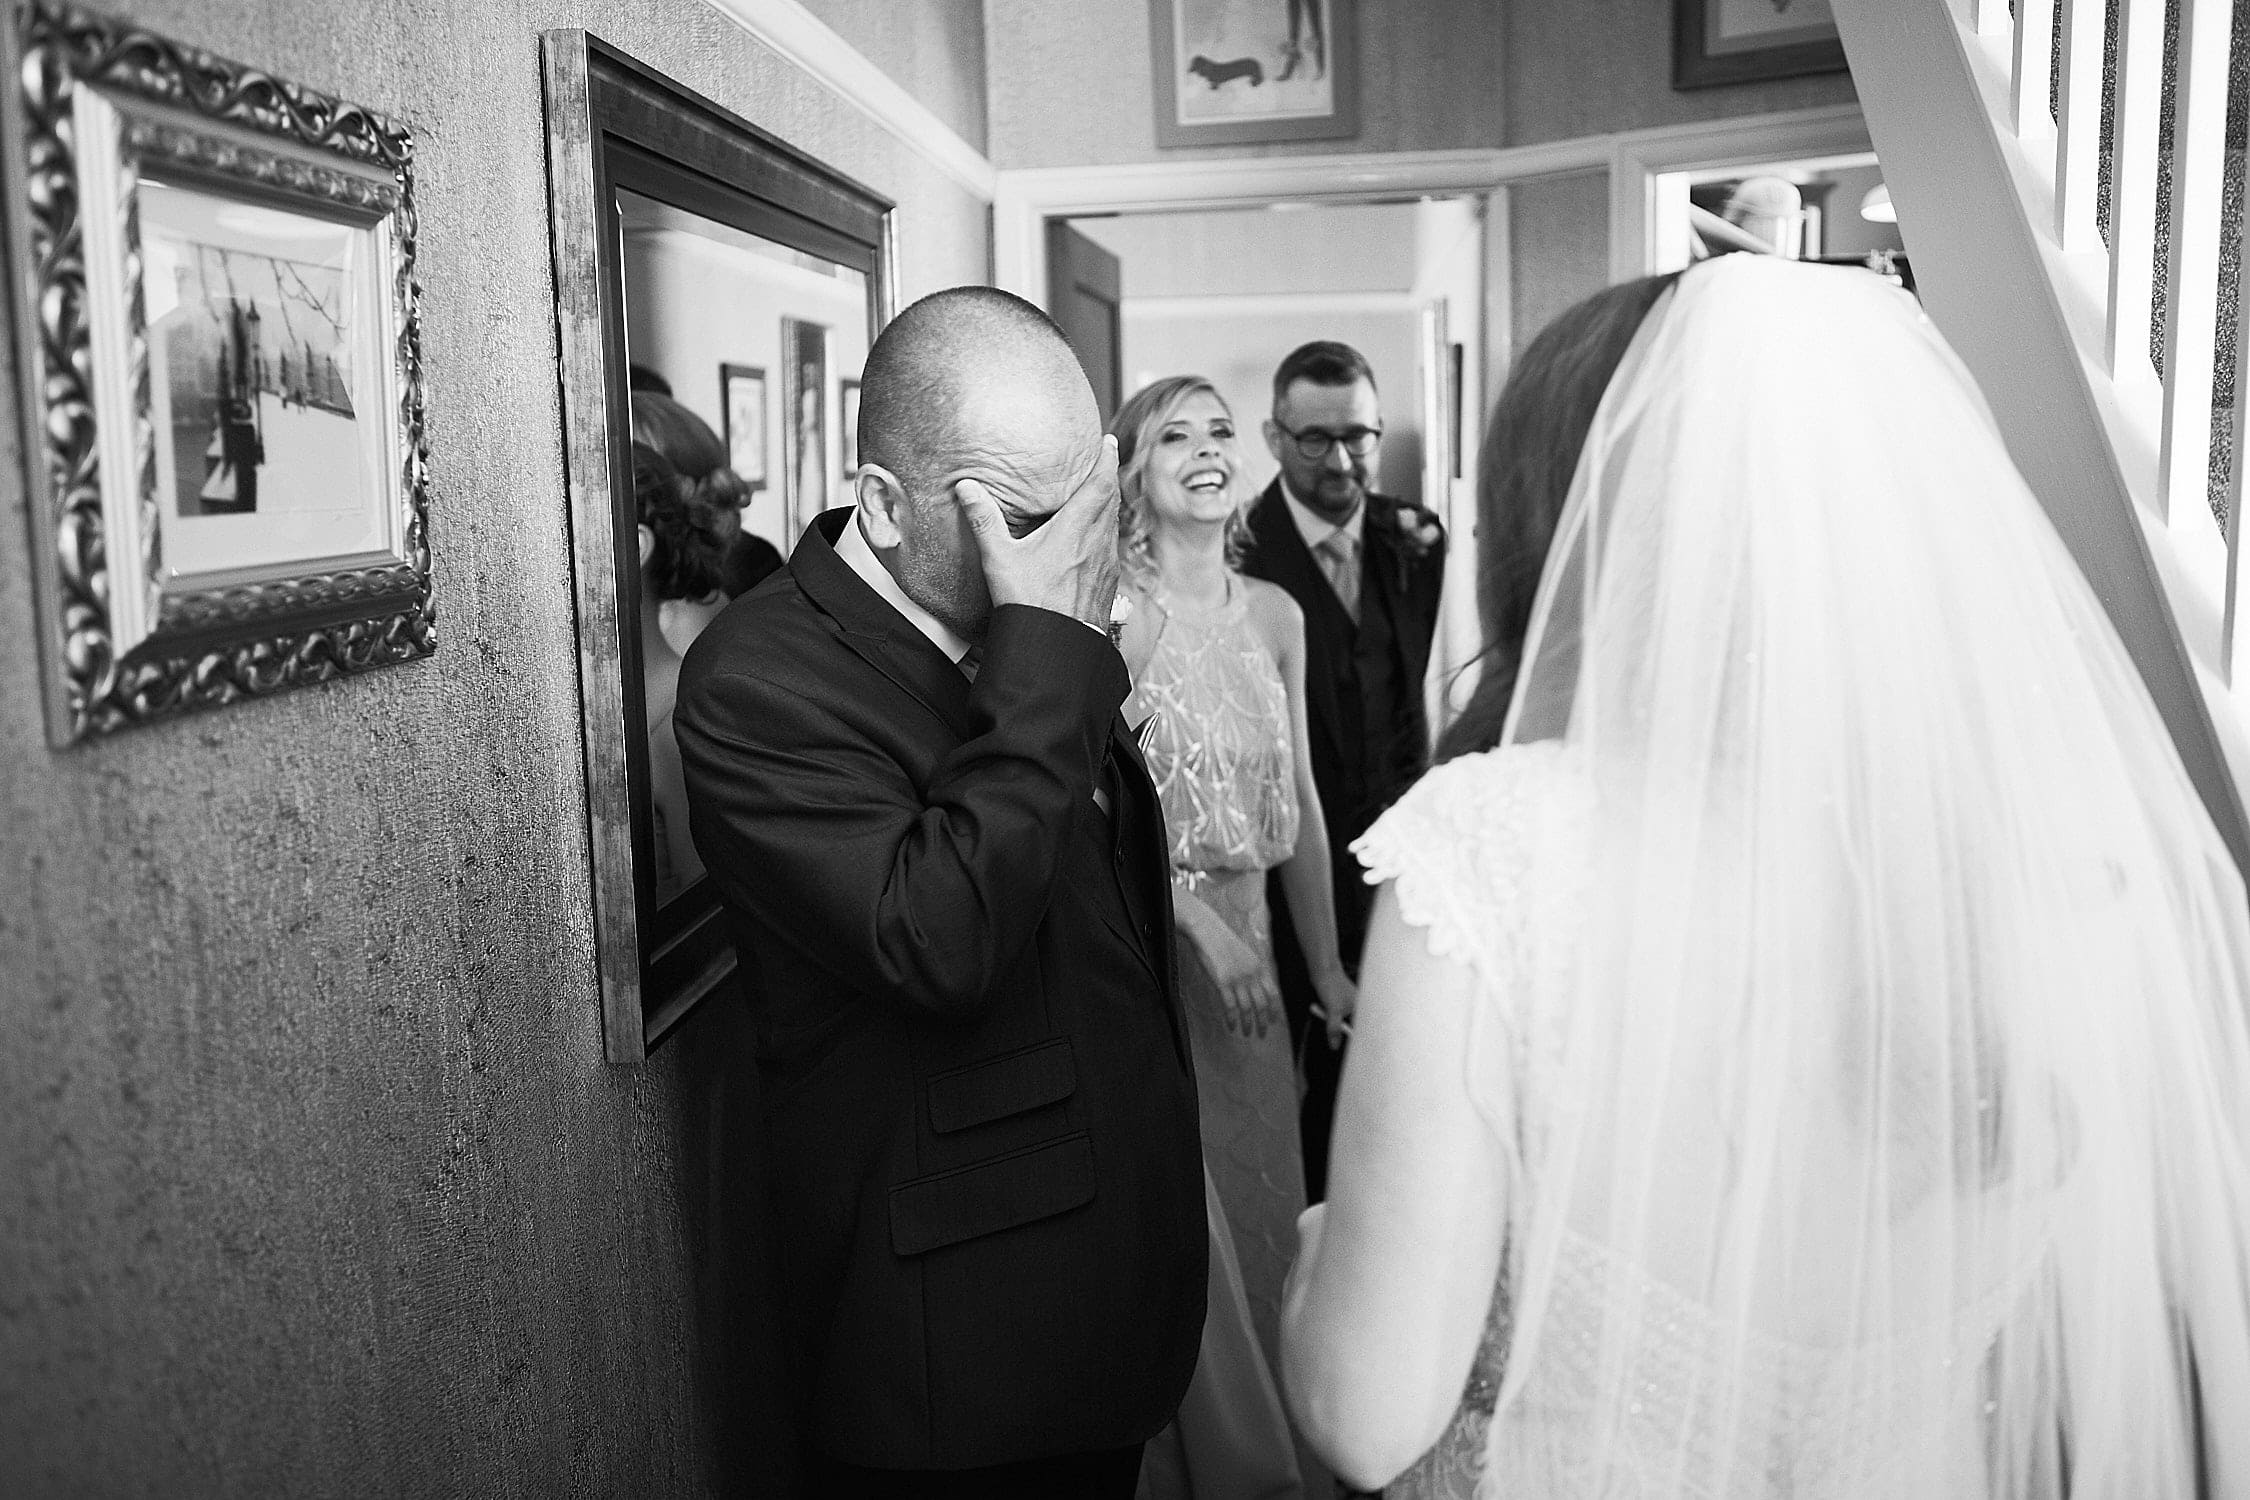 A dad is overwhelmed as he sees his daughter in her wedding dress for the first time. 166 Photography